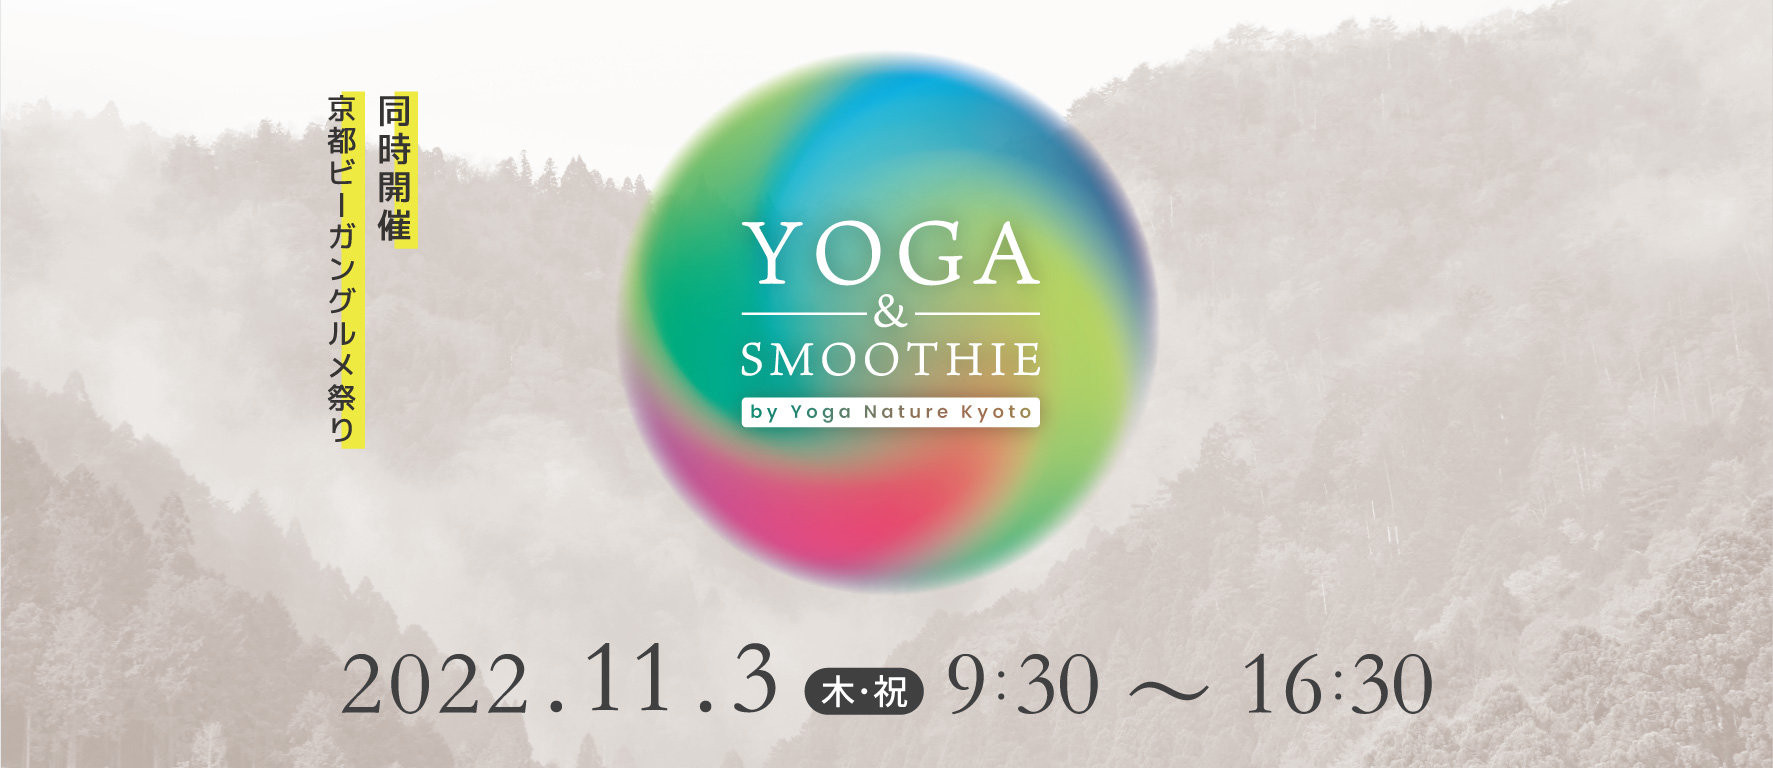 YOGA & SMOOTHIE by Yoga Nature Kyoto 2022